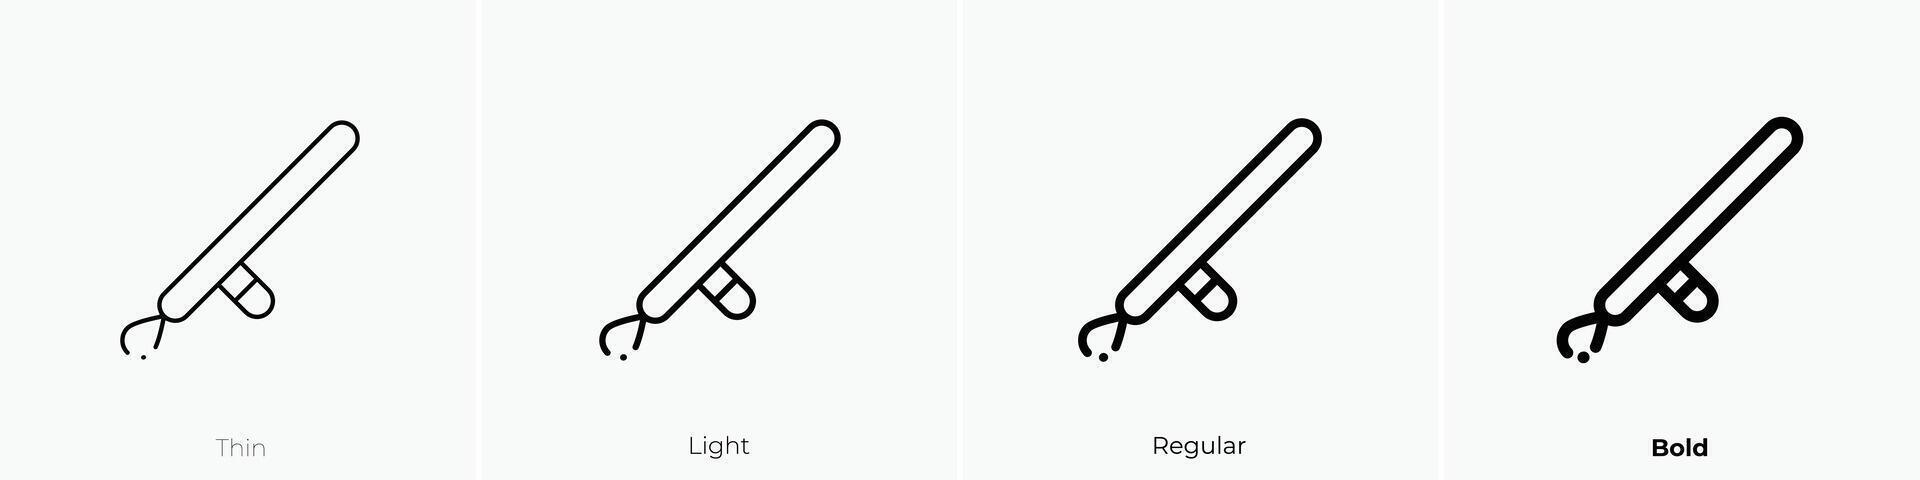 nightstick icon. Thin, Light, Regular And Bold style design isolated on white background vector